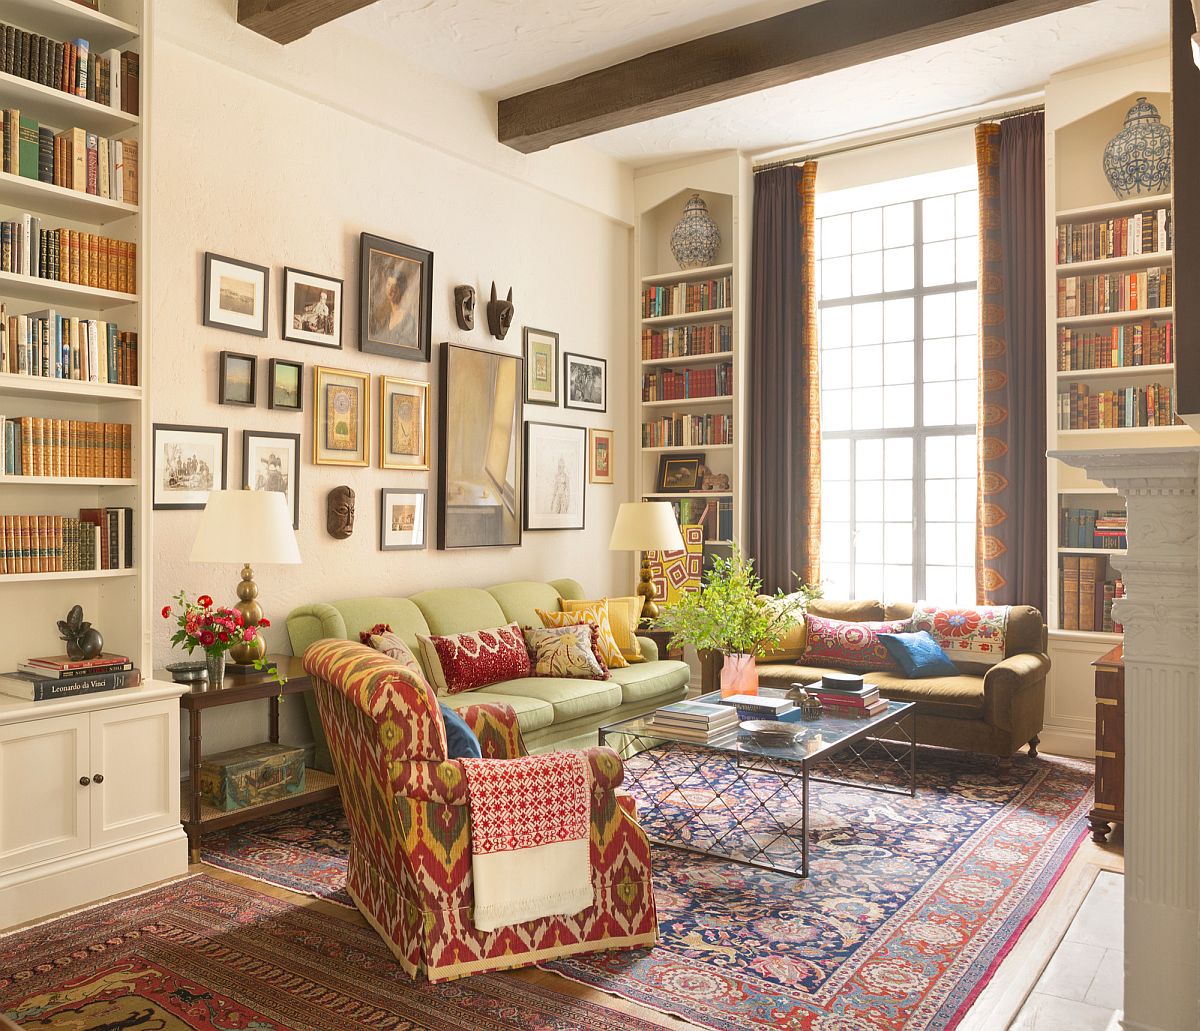 Living-room-of-New-York-home-with-modern-eclectic-style-and-ample-shelf-space-39790